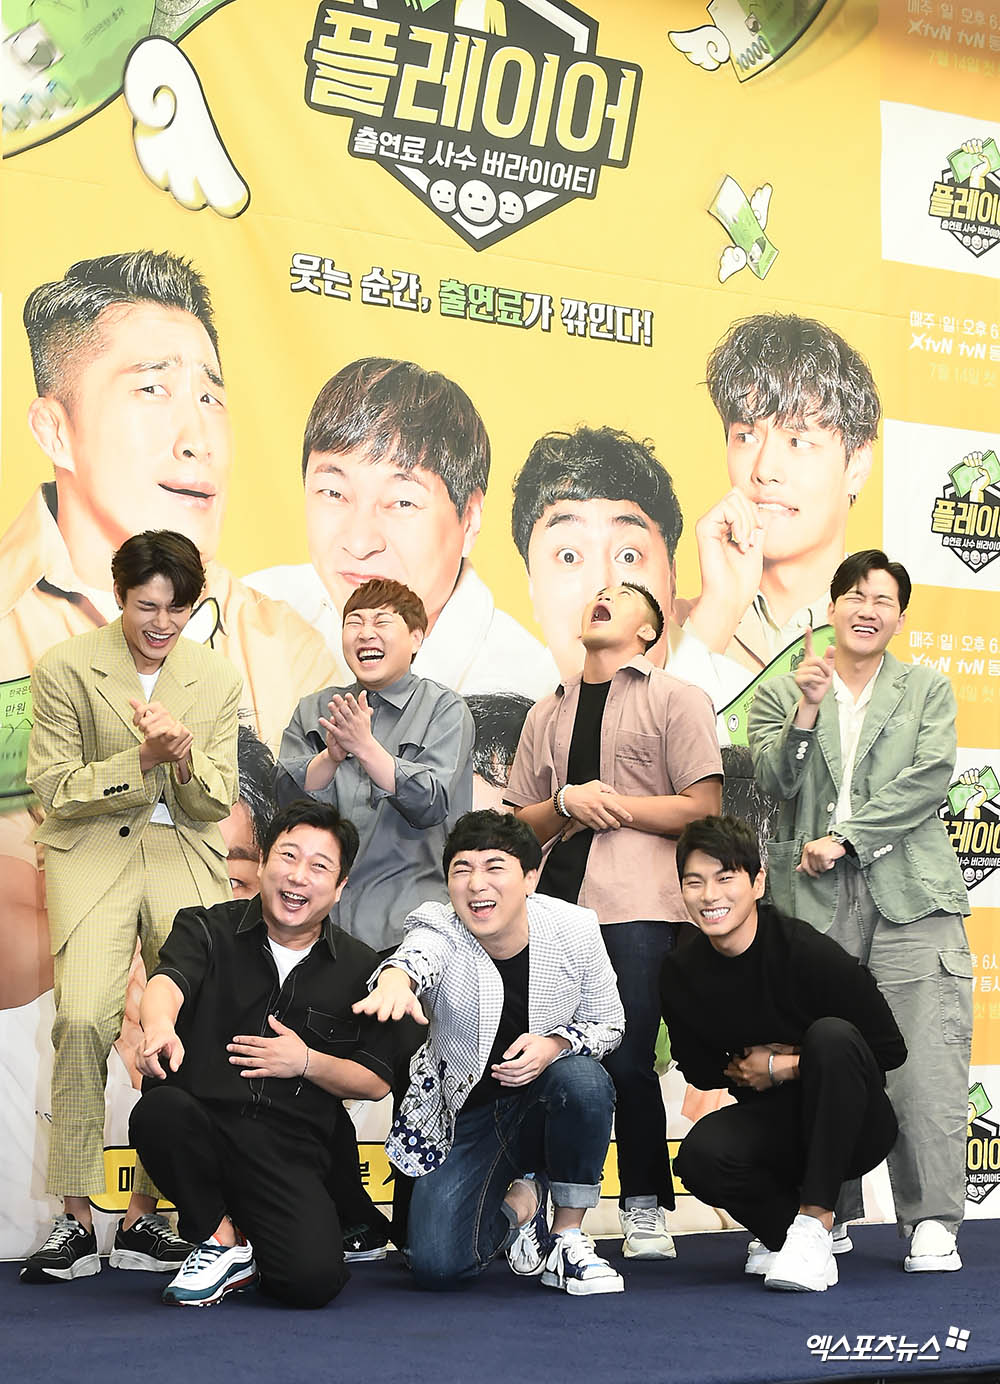 Every time you laugh, the pay is cut by 10,000 won. The Player has released the secrets of the seven members.On the 9th, XtvN new entertainment program The Player production presentation was held at the Stanford Hotel Grand Ballroom in Sangam-dong, Mapo-gu, Seoul.Lee Soo-geun, Kim Dong-Hyun, Hwang Jae-sung, Lee Yong-jin, Lee Jin-ho, Lee Yi-kyung, Jung Hyuk, Shim Woo-kyung PD and Nam Kyung-mo PD attended the ceremony.The Player is a program that must survive the frightening smile, solving a specific mission in a changing place and situation every week.Seven members will play a role in the virtual world for a day, become a character, solve the mission, and at the same time get all the payouts safely from the laughter hidden by the production team.If there is a difference from other programs, if the laughter breaks, the penalty and the payment fee will be deducted by a certain amount.Kim Dong-Hyun laughed at the performance fee, which is reduced by 10,000 won every time he laughed, saying, I was shocked to know that it was really shaved. It is a terrible pro.At the production presentation on the day, a trailer was released once, and the members struggle to endure laughter came out in various places.There were also a variety of kinds of laughter, such as those who laughed at others, and those who laughed at themselves.Lee Yong-jin said, There are a lot of comedians, but rather than causing laughter, the laughter bombs planted by the production team during the middle cause laughter.Lee Jin-ho also said: I thought I could stand the laugh but I was hit by the scale of the ridiculous production team.I am not greedy as much as I can because I am laughing when I try to laugh, he said.In the first recording, the cut fee reached as much as 3 million won. The Player production team said, The fuel is different, but the fine is the same.I thought that 10,000 won was an acceptable amount, and fortunately everyone accepted it thankfully. One of the points of the show is the appearance of various guests. The surprise appearance of rapper BWI and singer Kim Yeon-woo was released earlier.Lee Yi-kyung said: There are a lot of people besides those who have appeared in the article, and when I said I was going to pay for it, I was satisfied (seeing the quality) right away.Im looking forward to seeing who will come next, Lee Soo-geun said, there are a lot of really amazing people.There is Jang Dong-min, but there are also junior comedians everywhere. Finally, the production team said, The guests I want to take are lion Ahn Sung-ki, Park Seo-joon, Woo Do-hwan and Bongo-dong Battle Yu Hae-jin, Ryu Joon-yeol and Jo Woo-jin.I really want to take him, she wrote in a love call.The Player will be broadcasted simultaneously at 6:15 pm on Sunday 14th at XtvN and tvN.